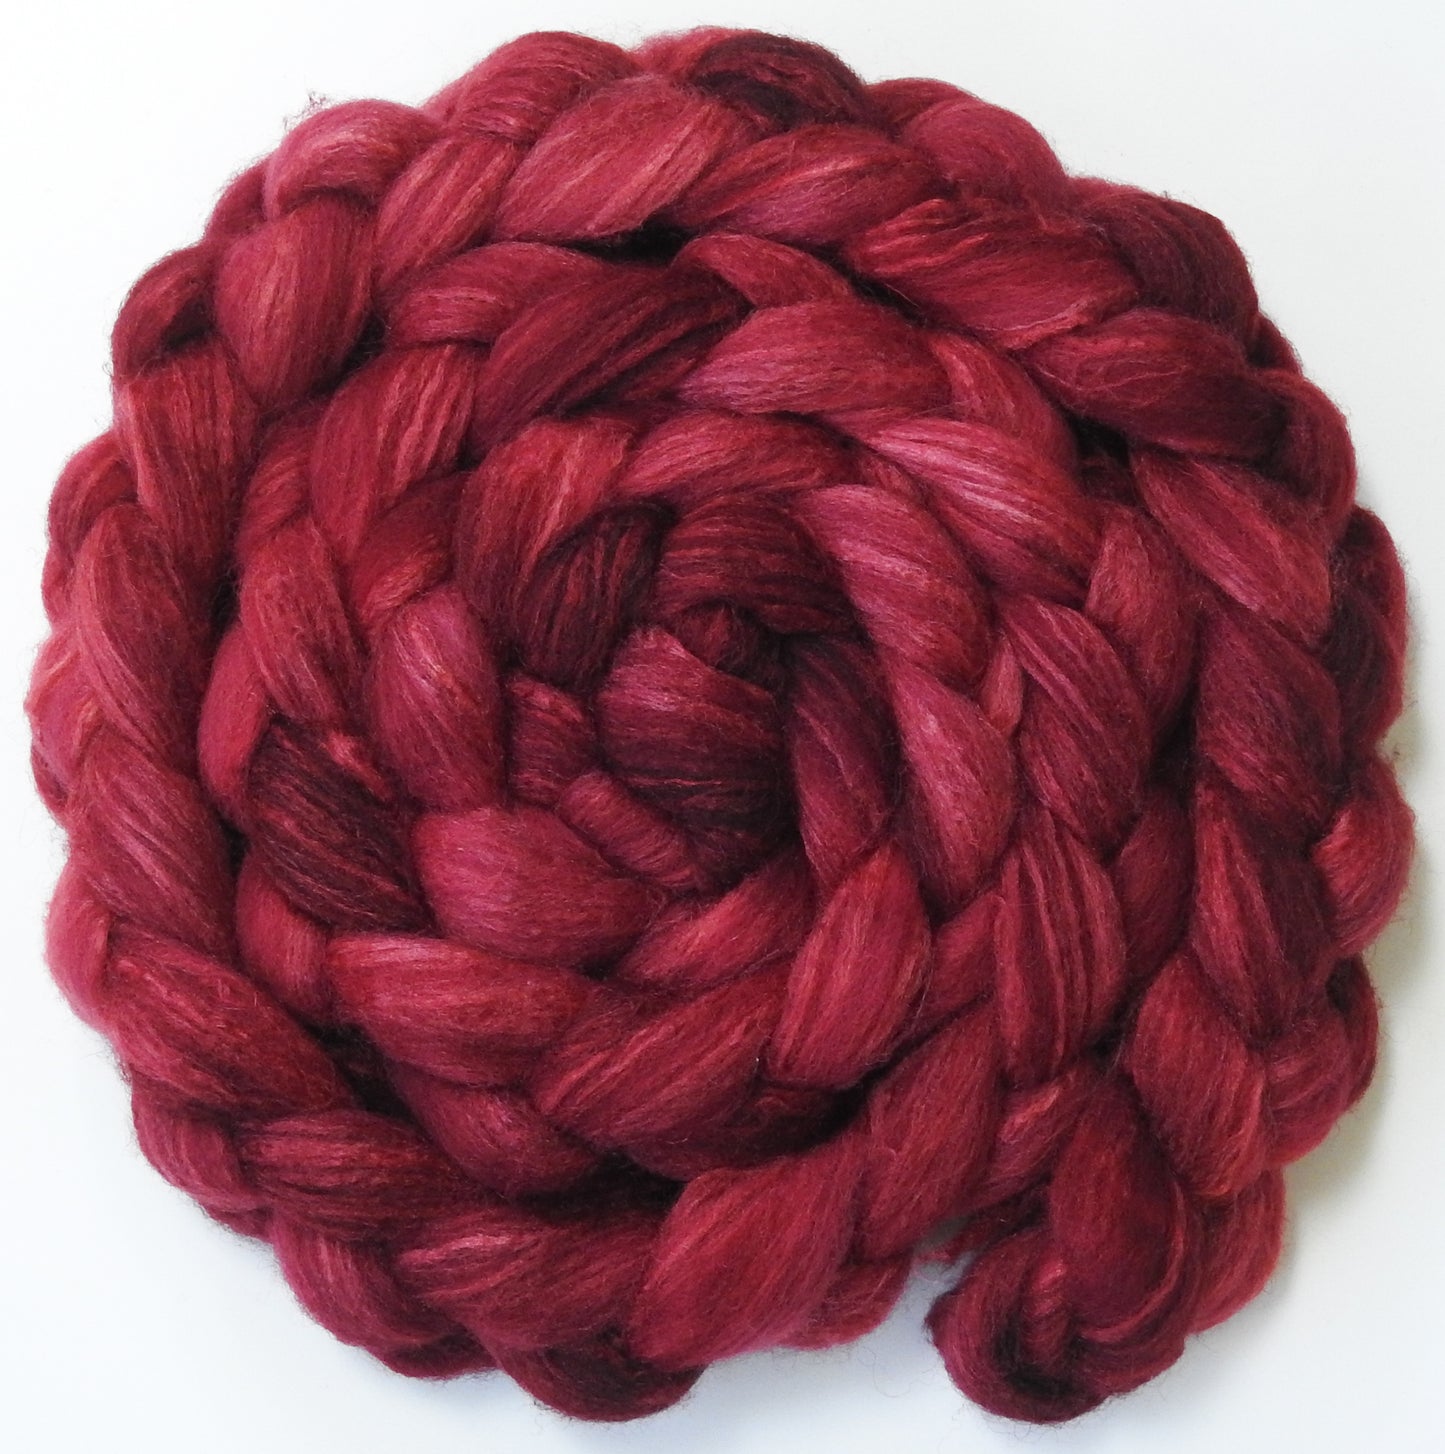 Holly Berry - 6 oz.- British Southdown/ tussah silk (65/ 35)